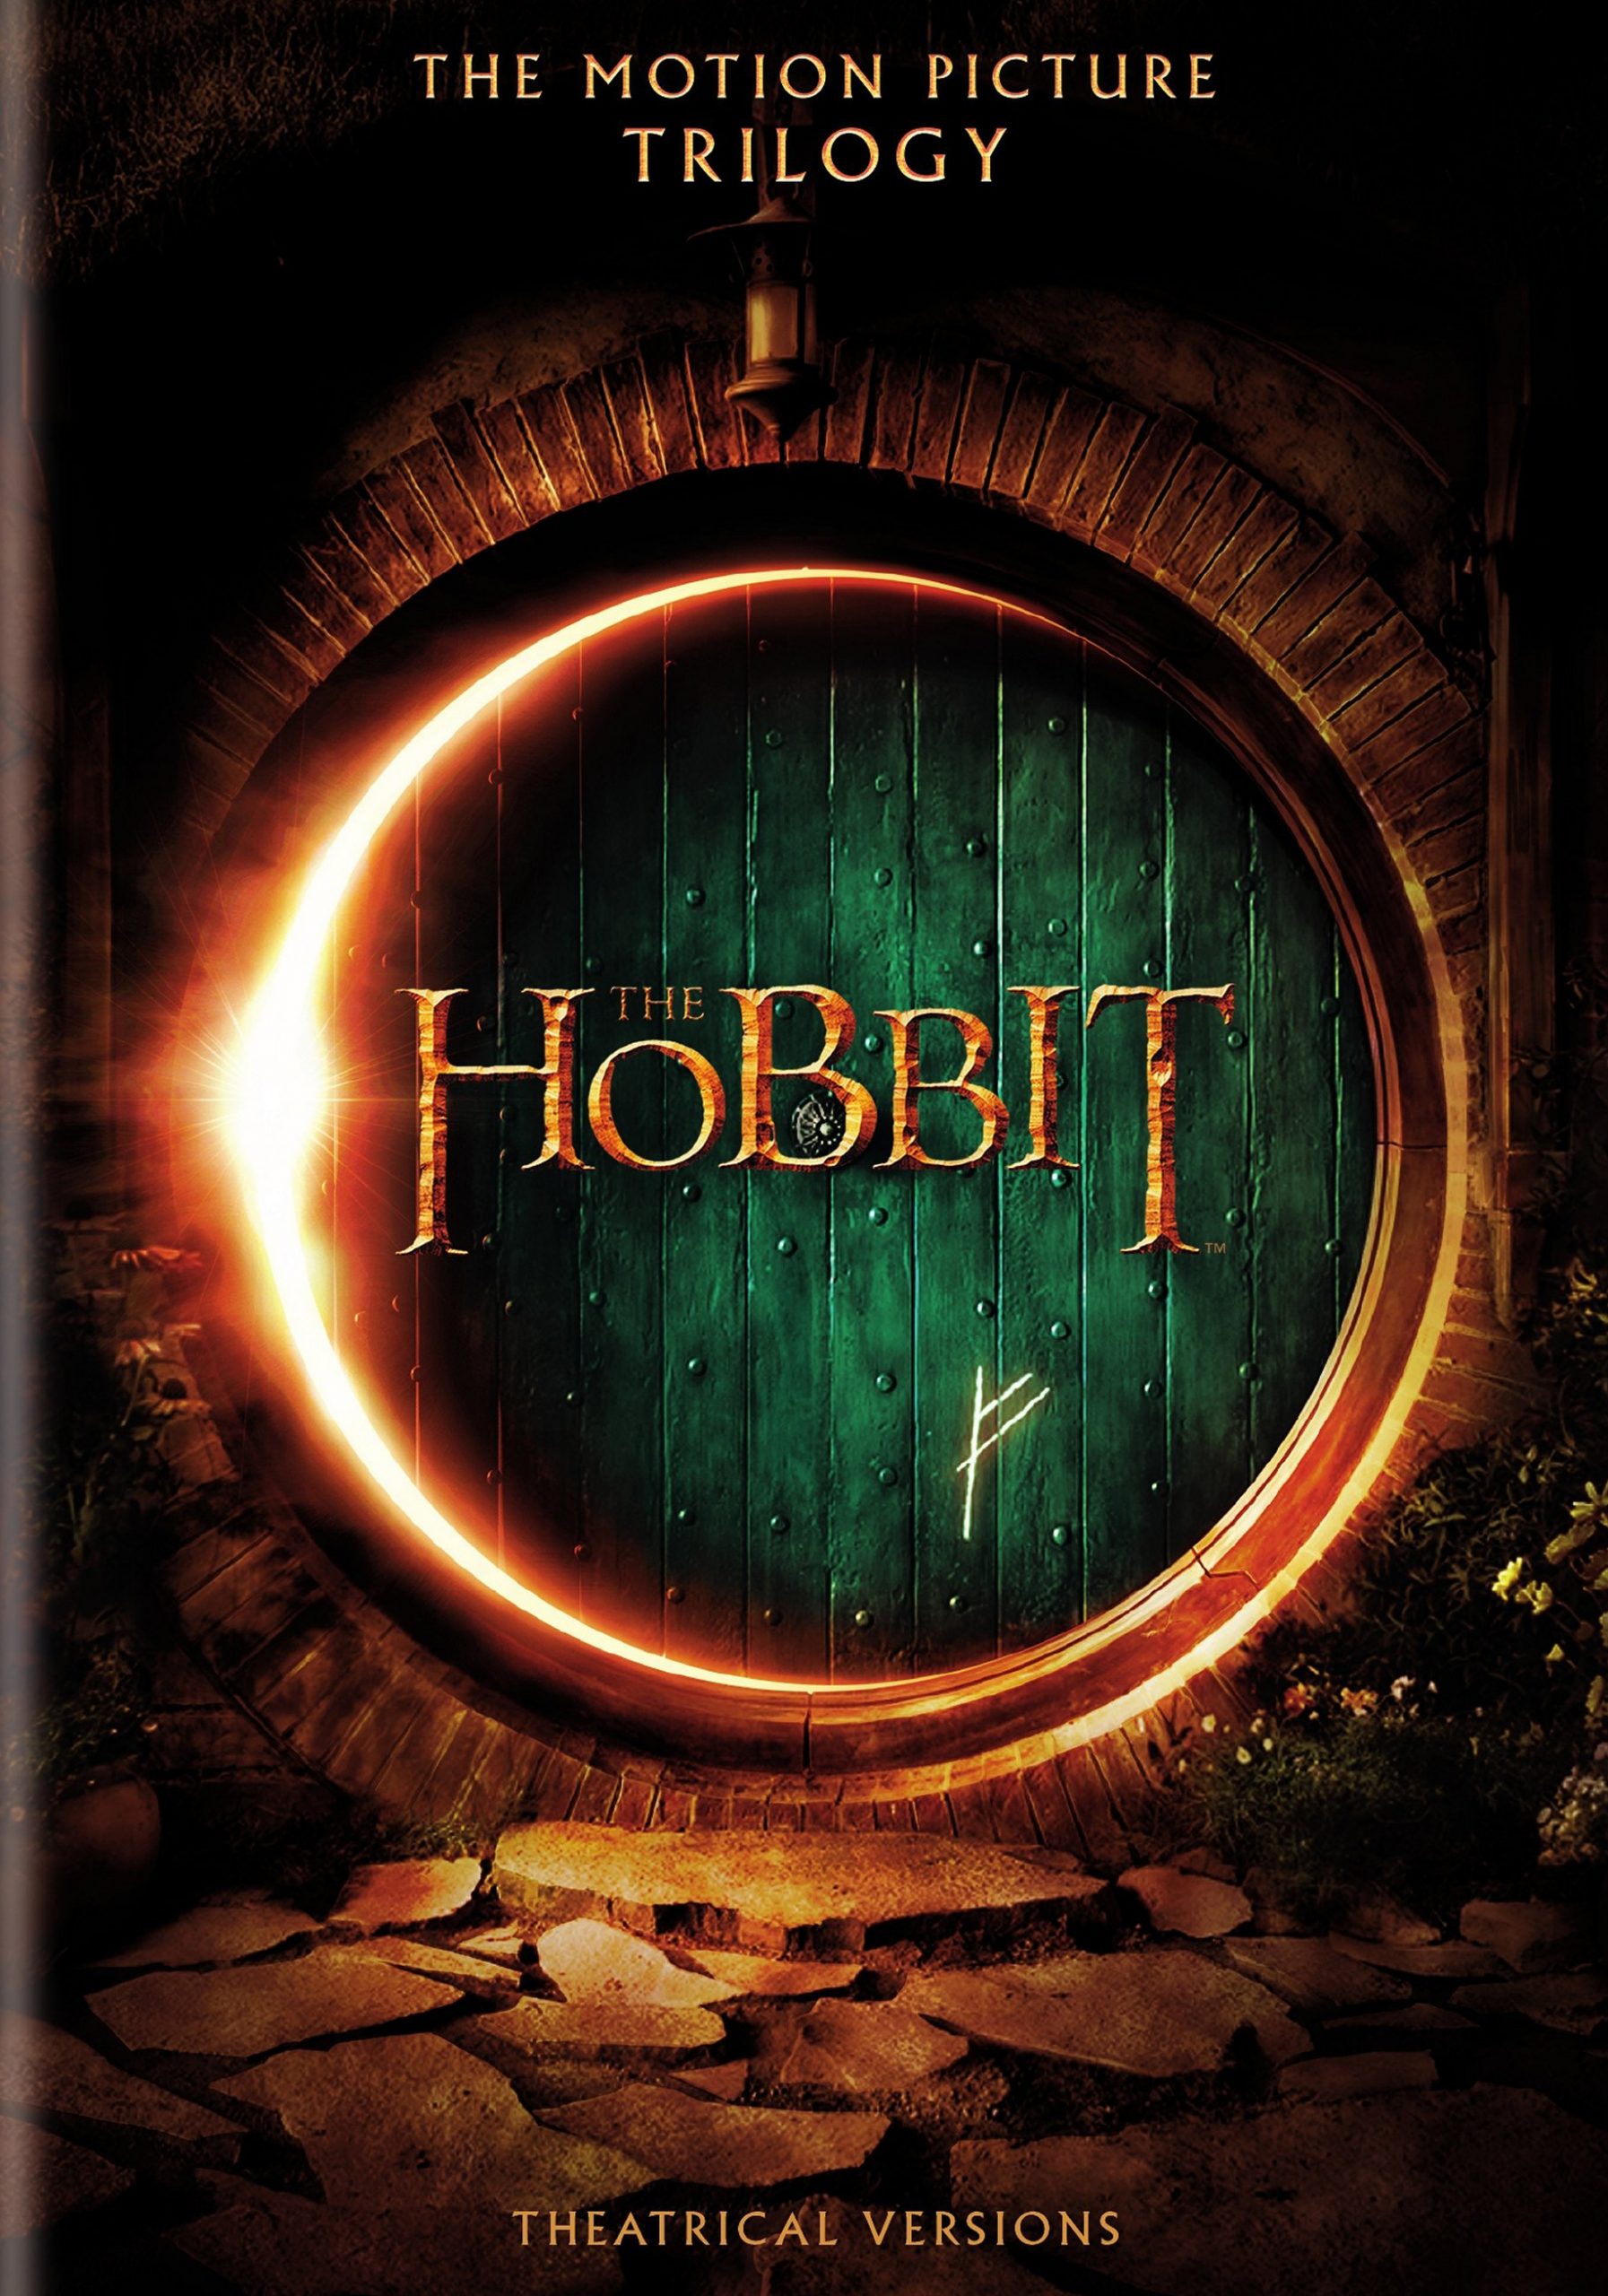 See The Hobbit in Library Catalog